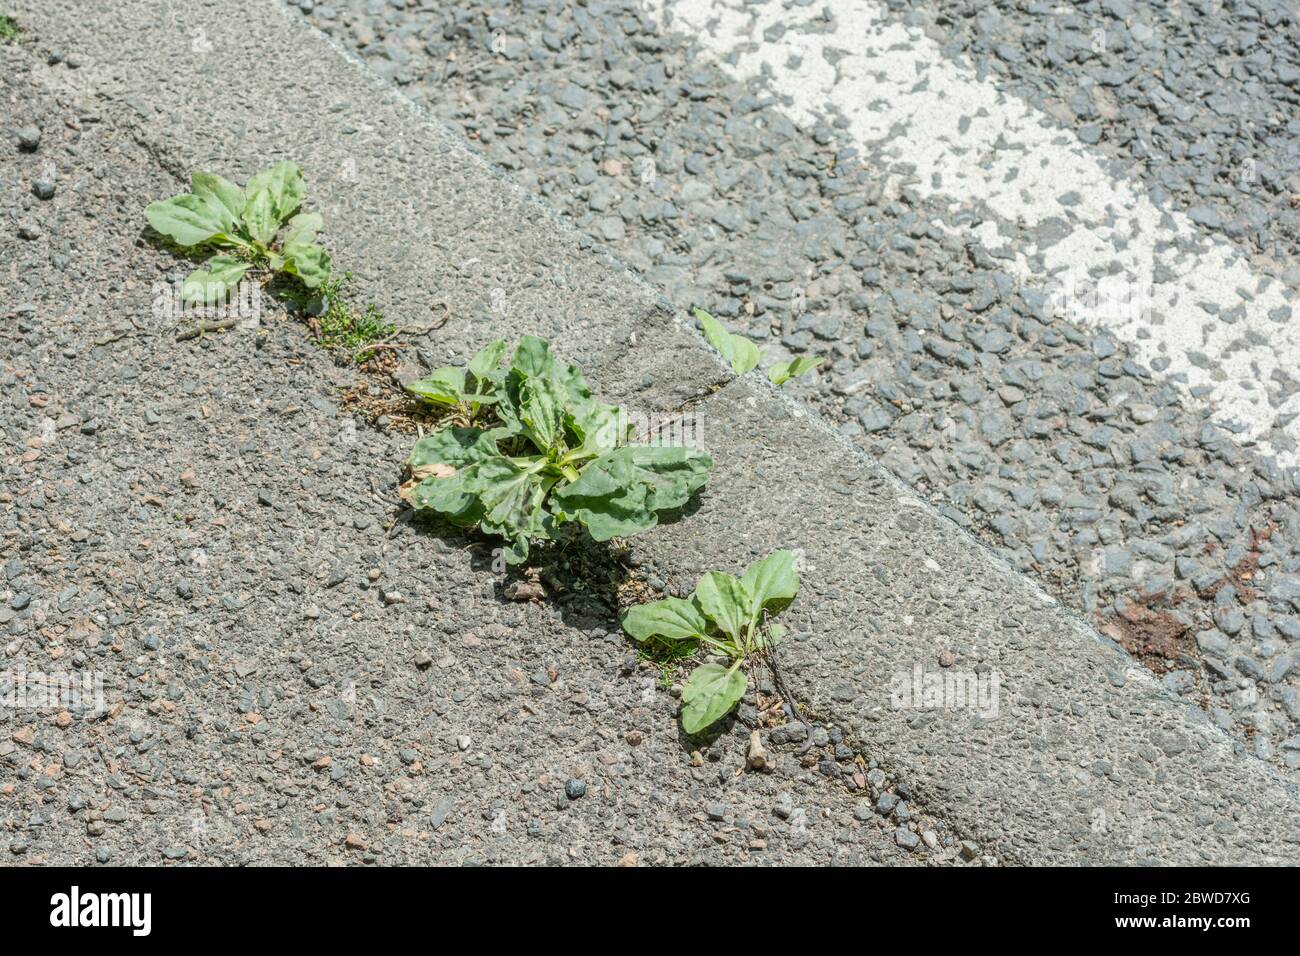 Leaves of Greater Plantain / Plantago major plant growing in cracks in a rural tarmac road. Metaphor harsh growing conditions, tough conditions. Stock Photo